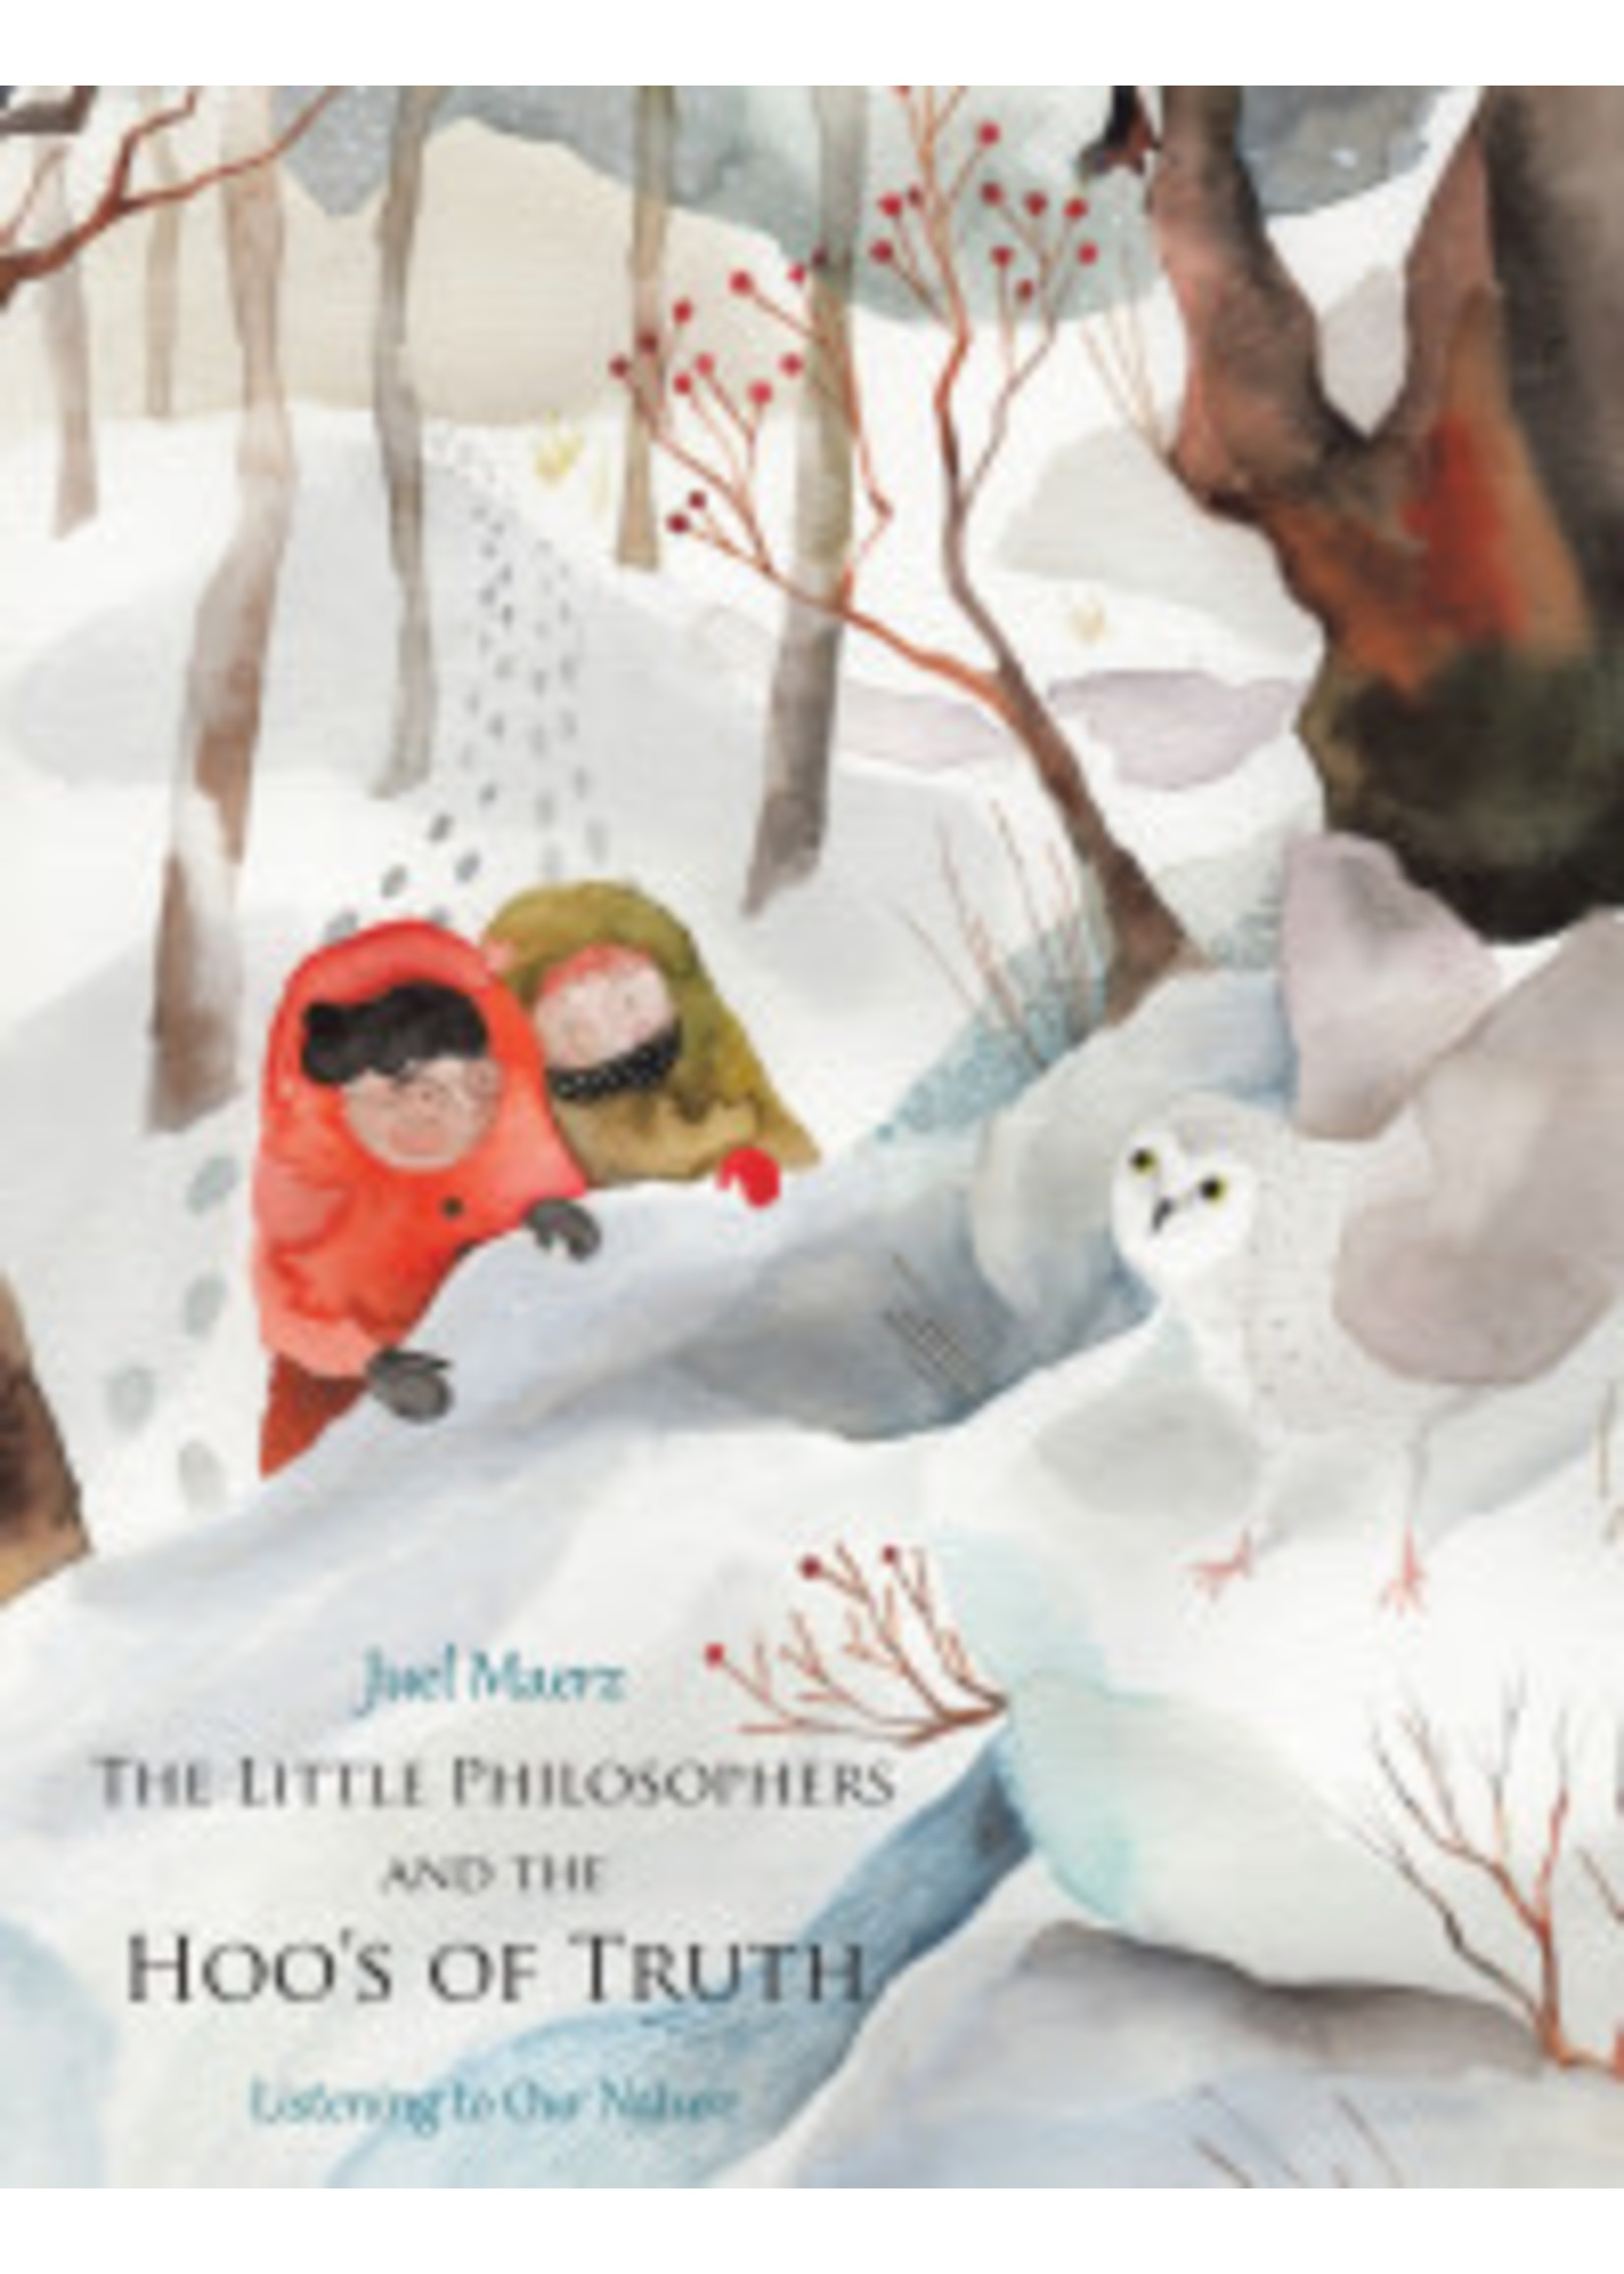 The Little Philosophers and the Hoo's of Truth by Juel Maerz